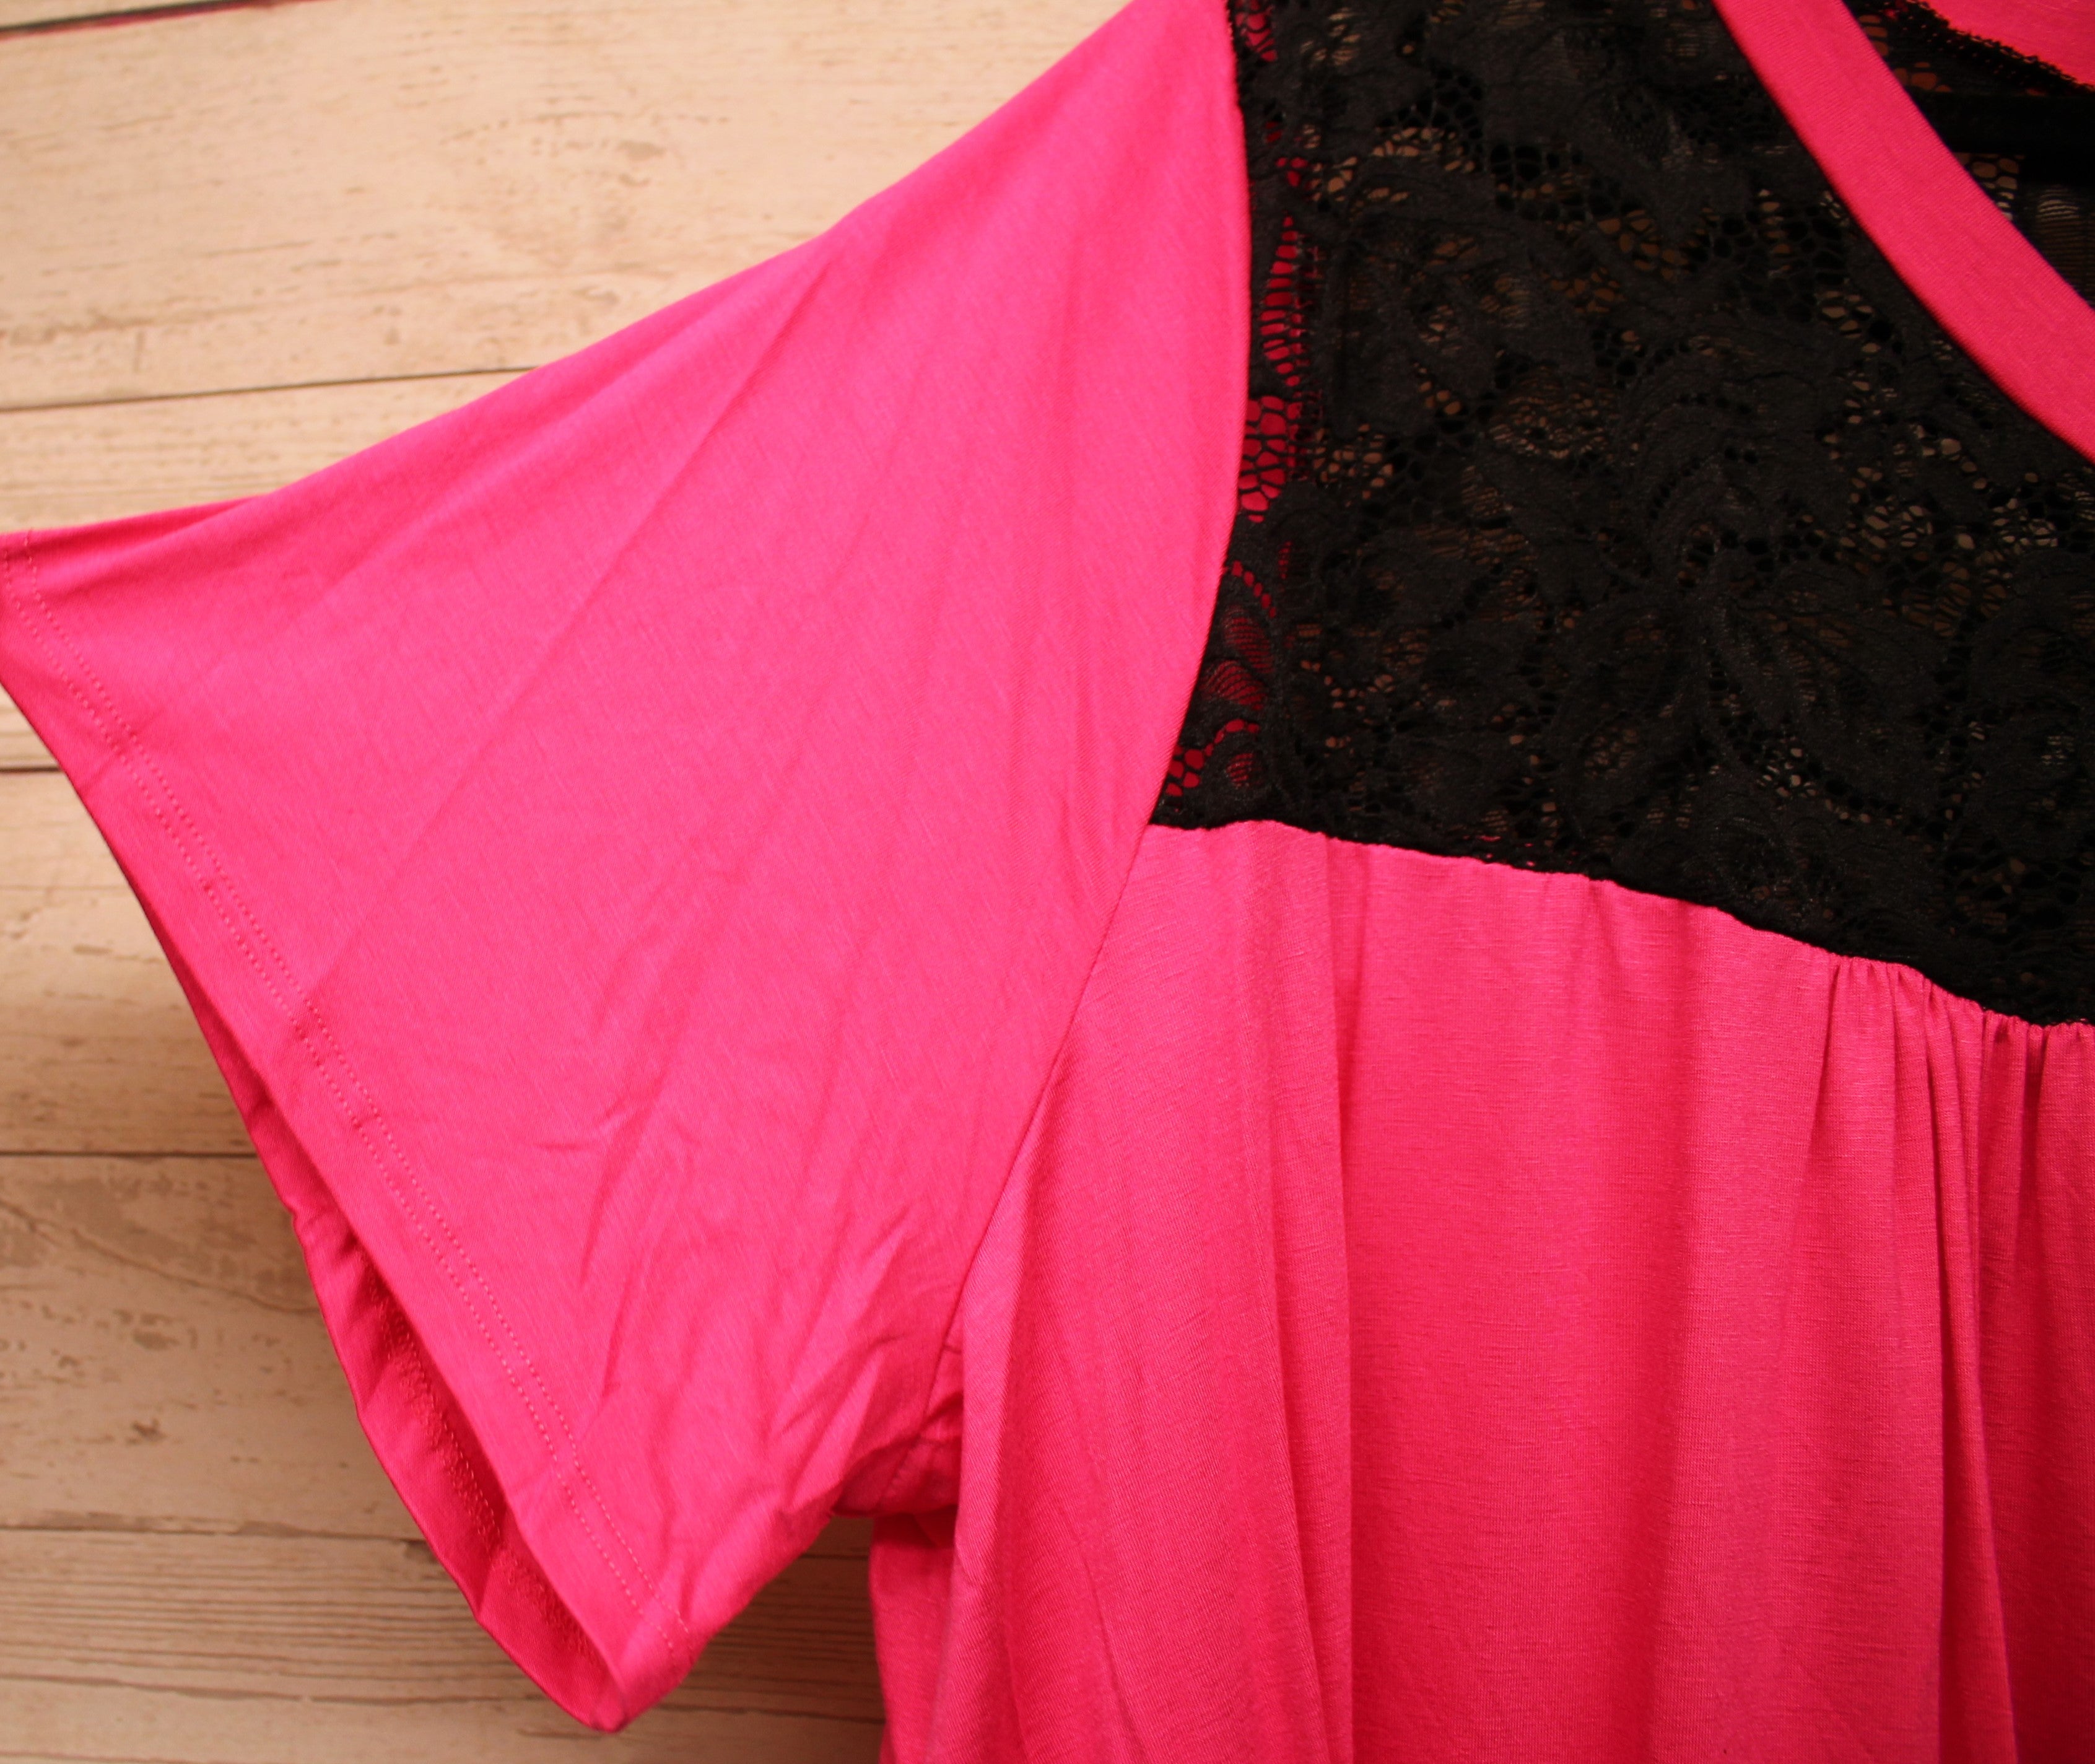 PSFU Pink with Black Lace Accent Top